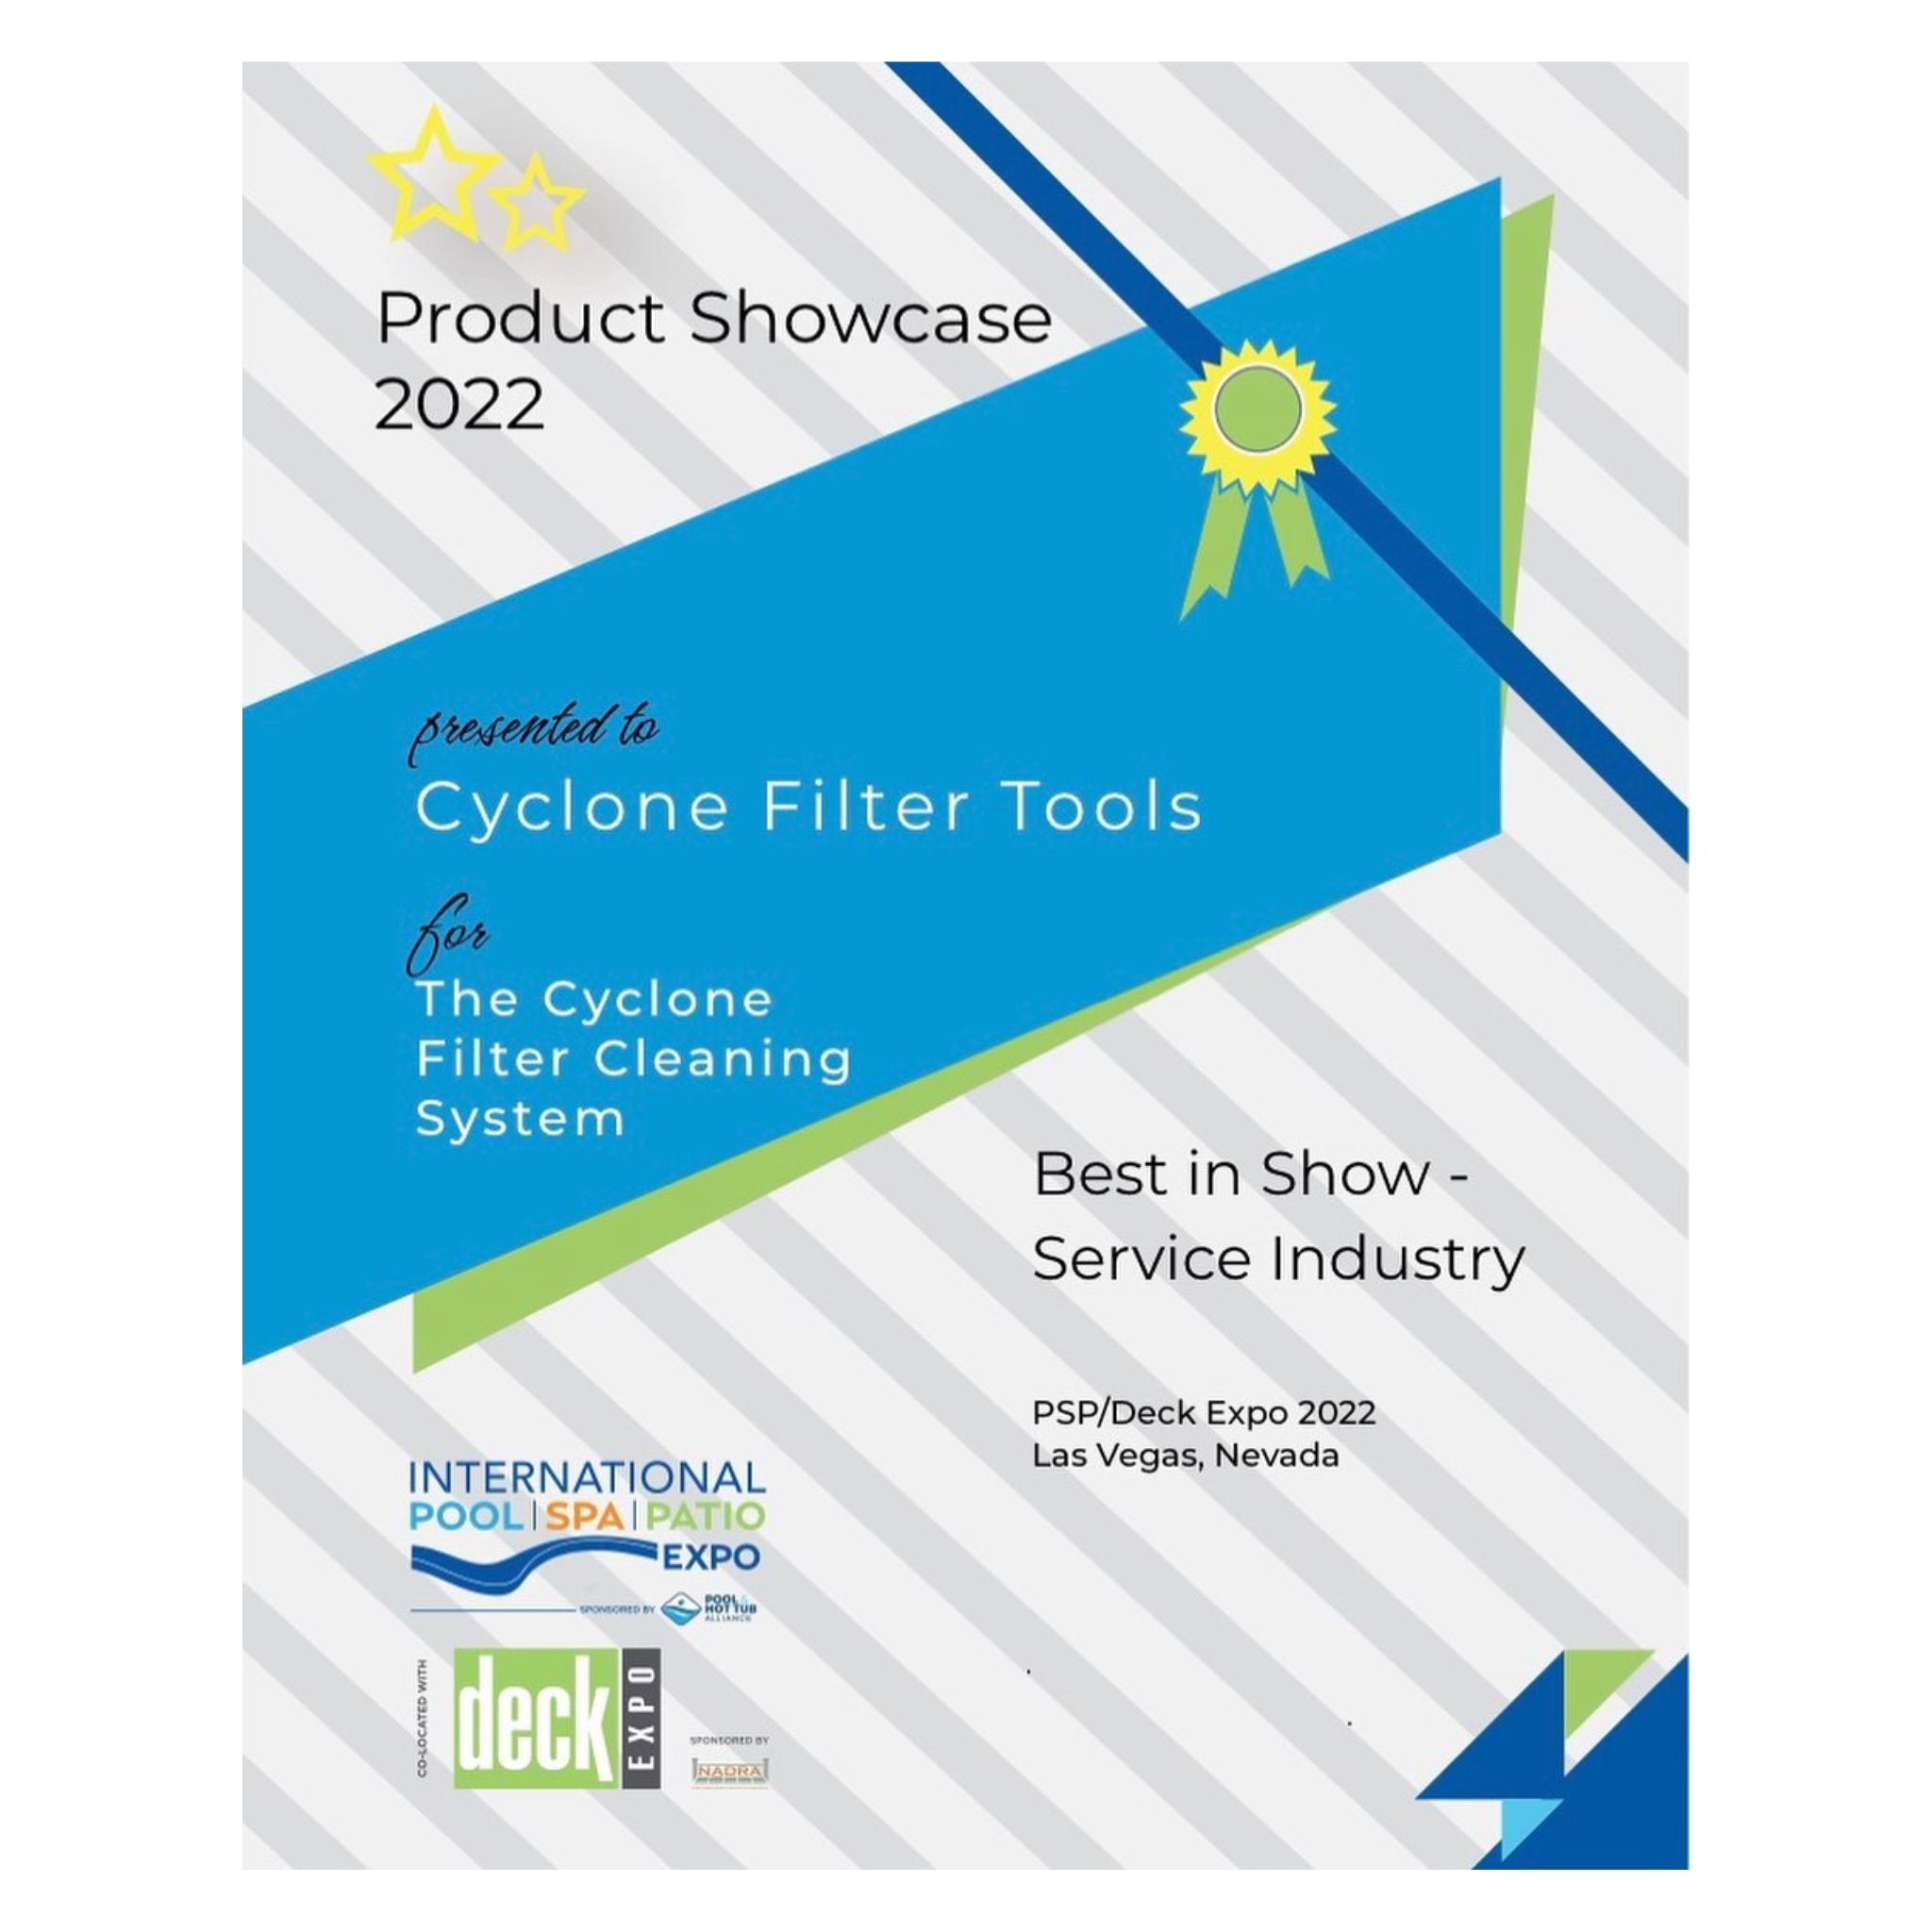 Best in Show - Service Industry 2022 | The Cyclone Filter Cleaner